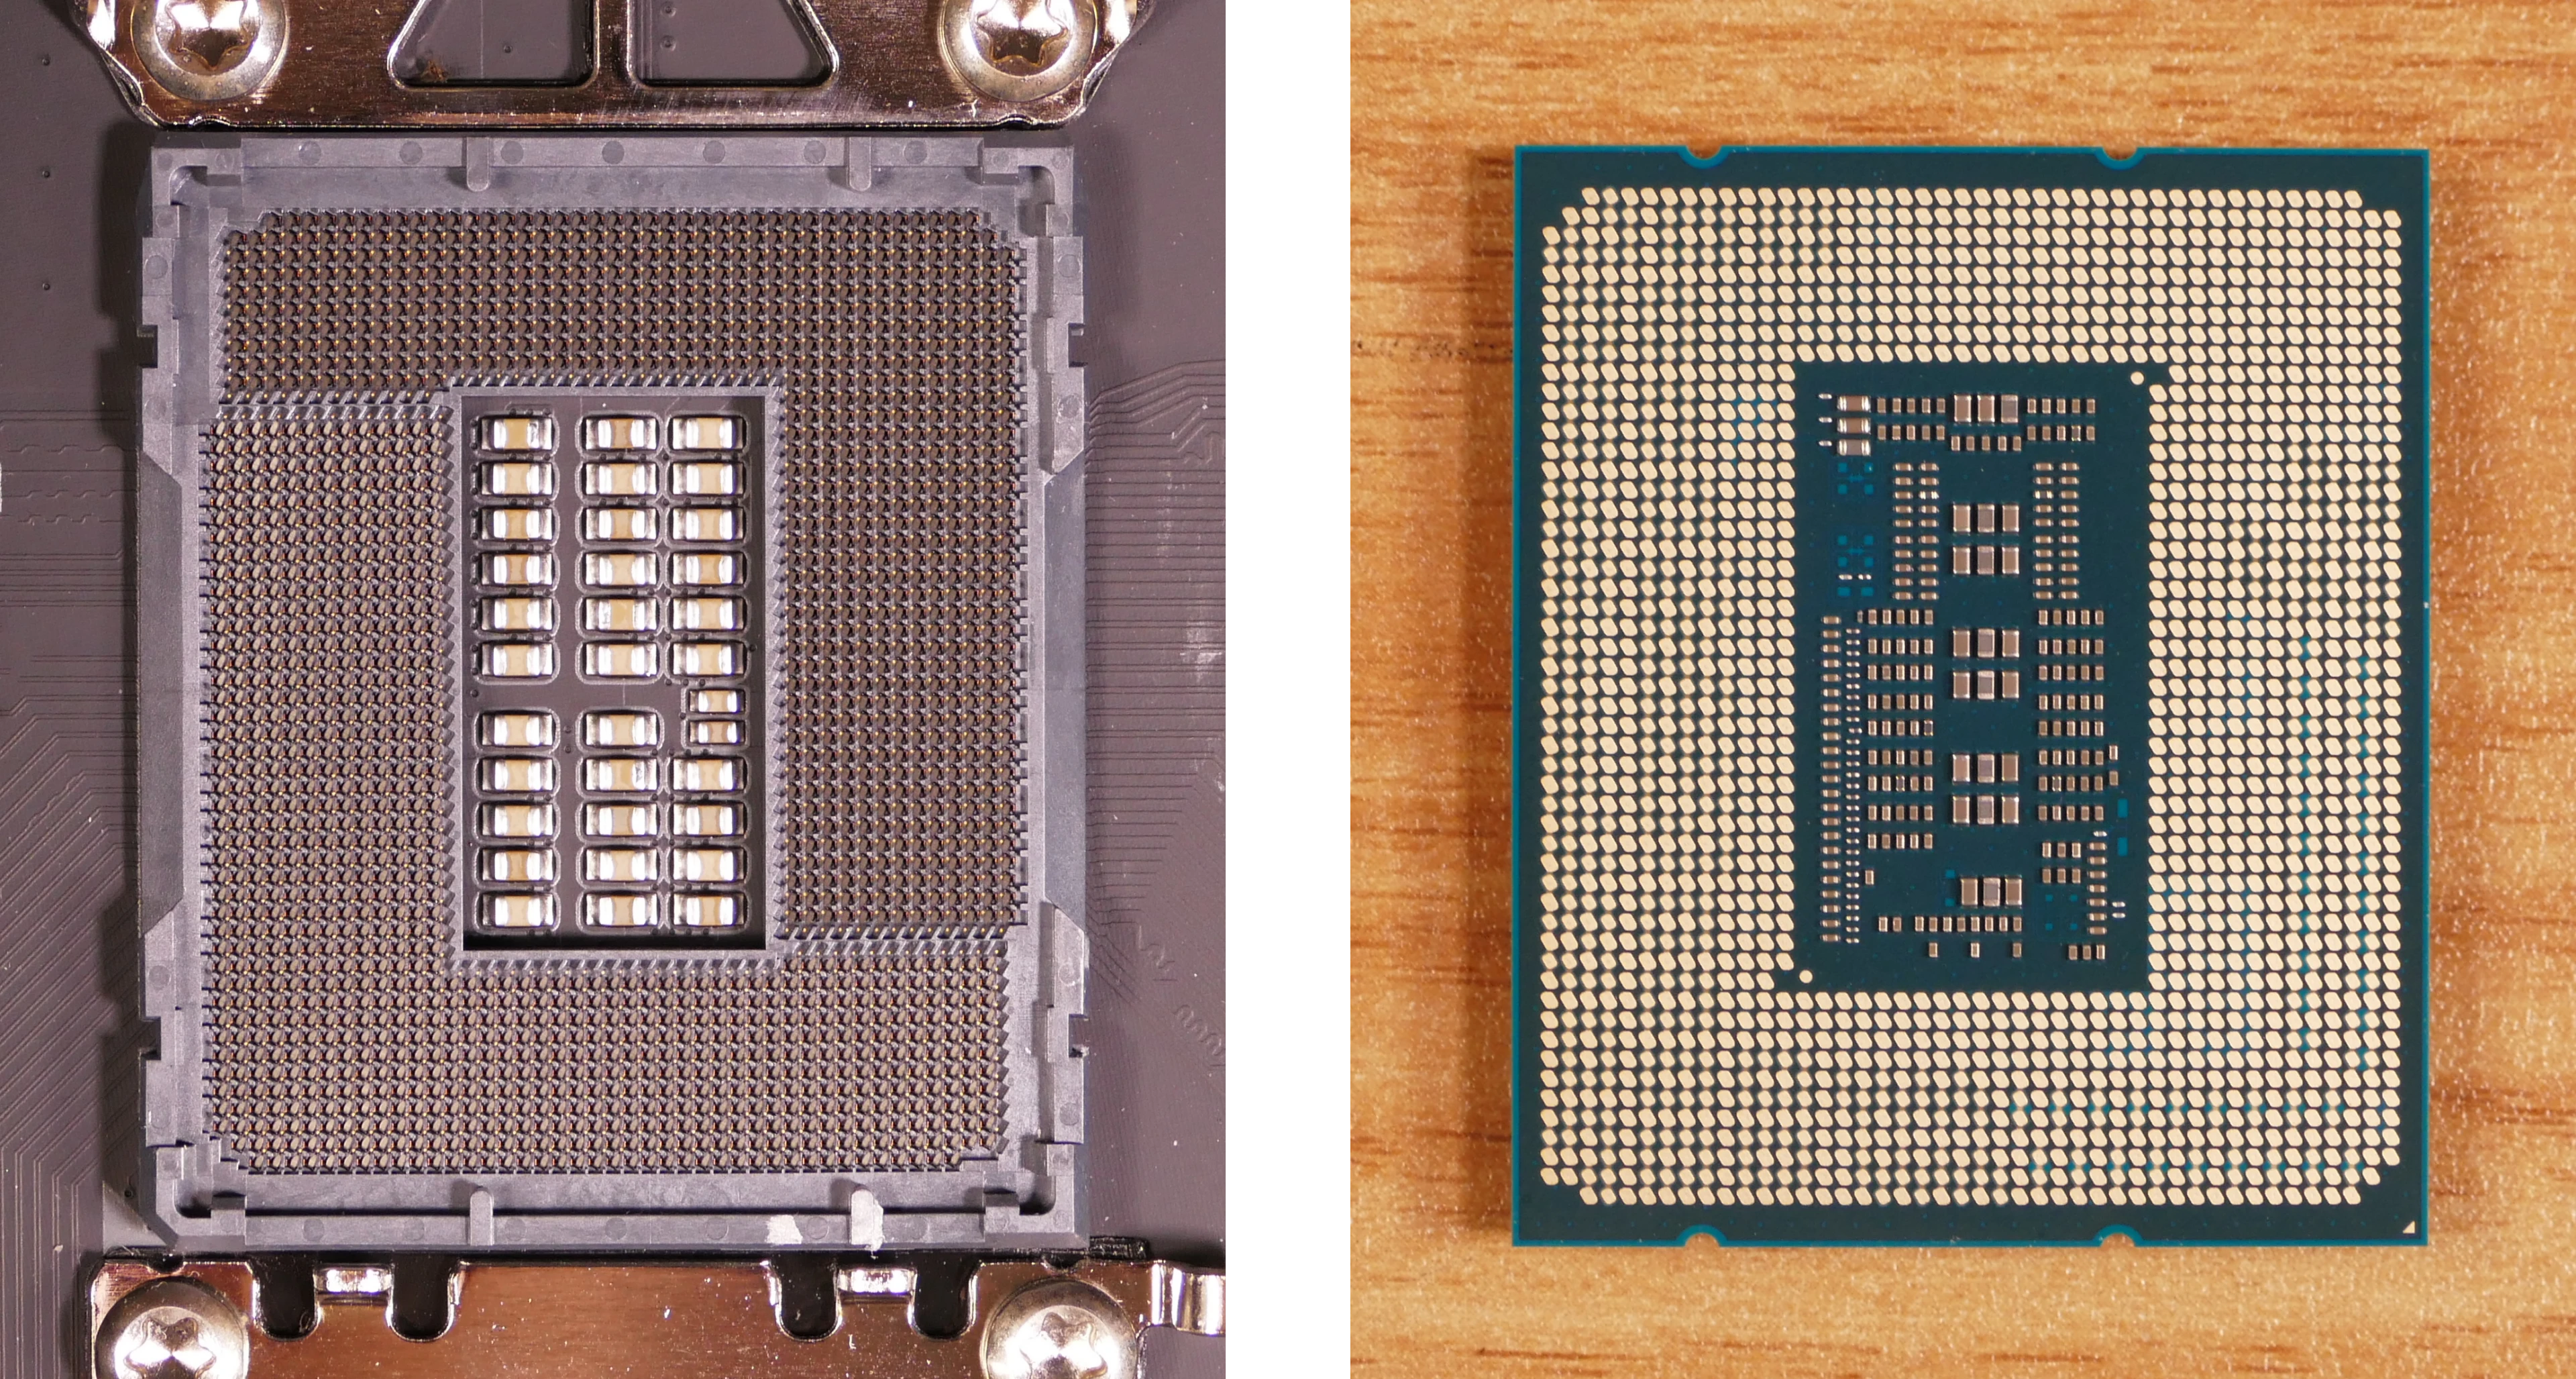 CPU (removed)